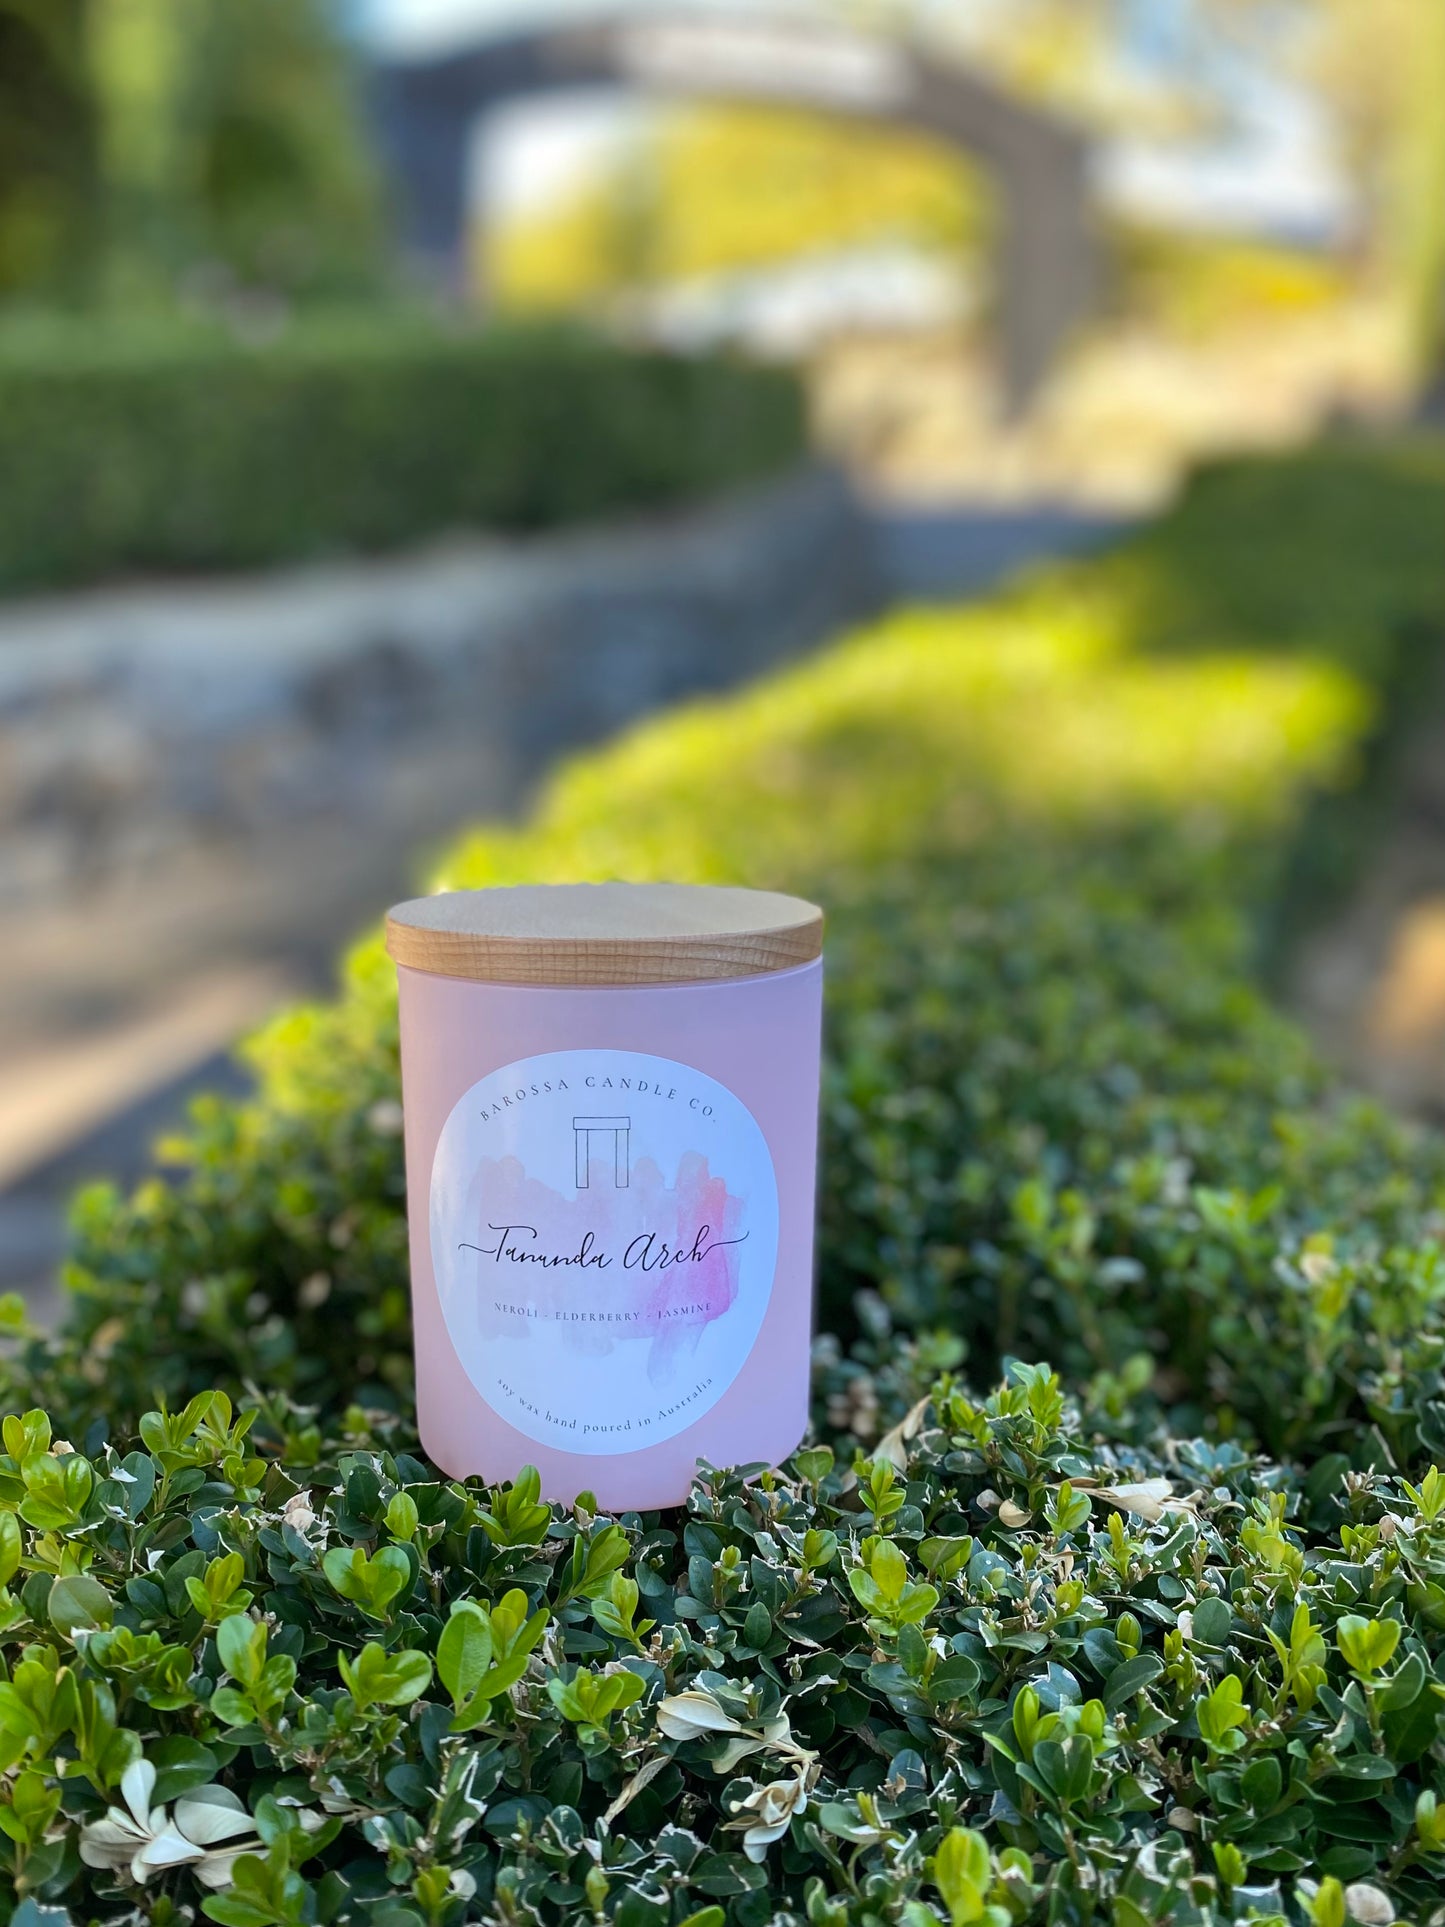 Tanunda Arch: Lilly Pilly + Rose Coconut Soy Candle